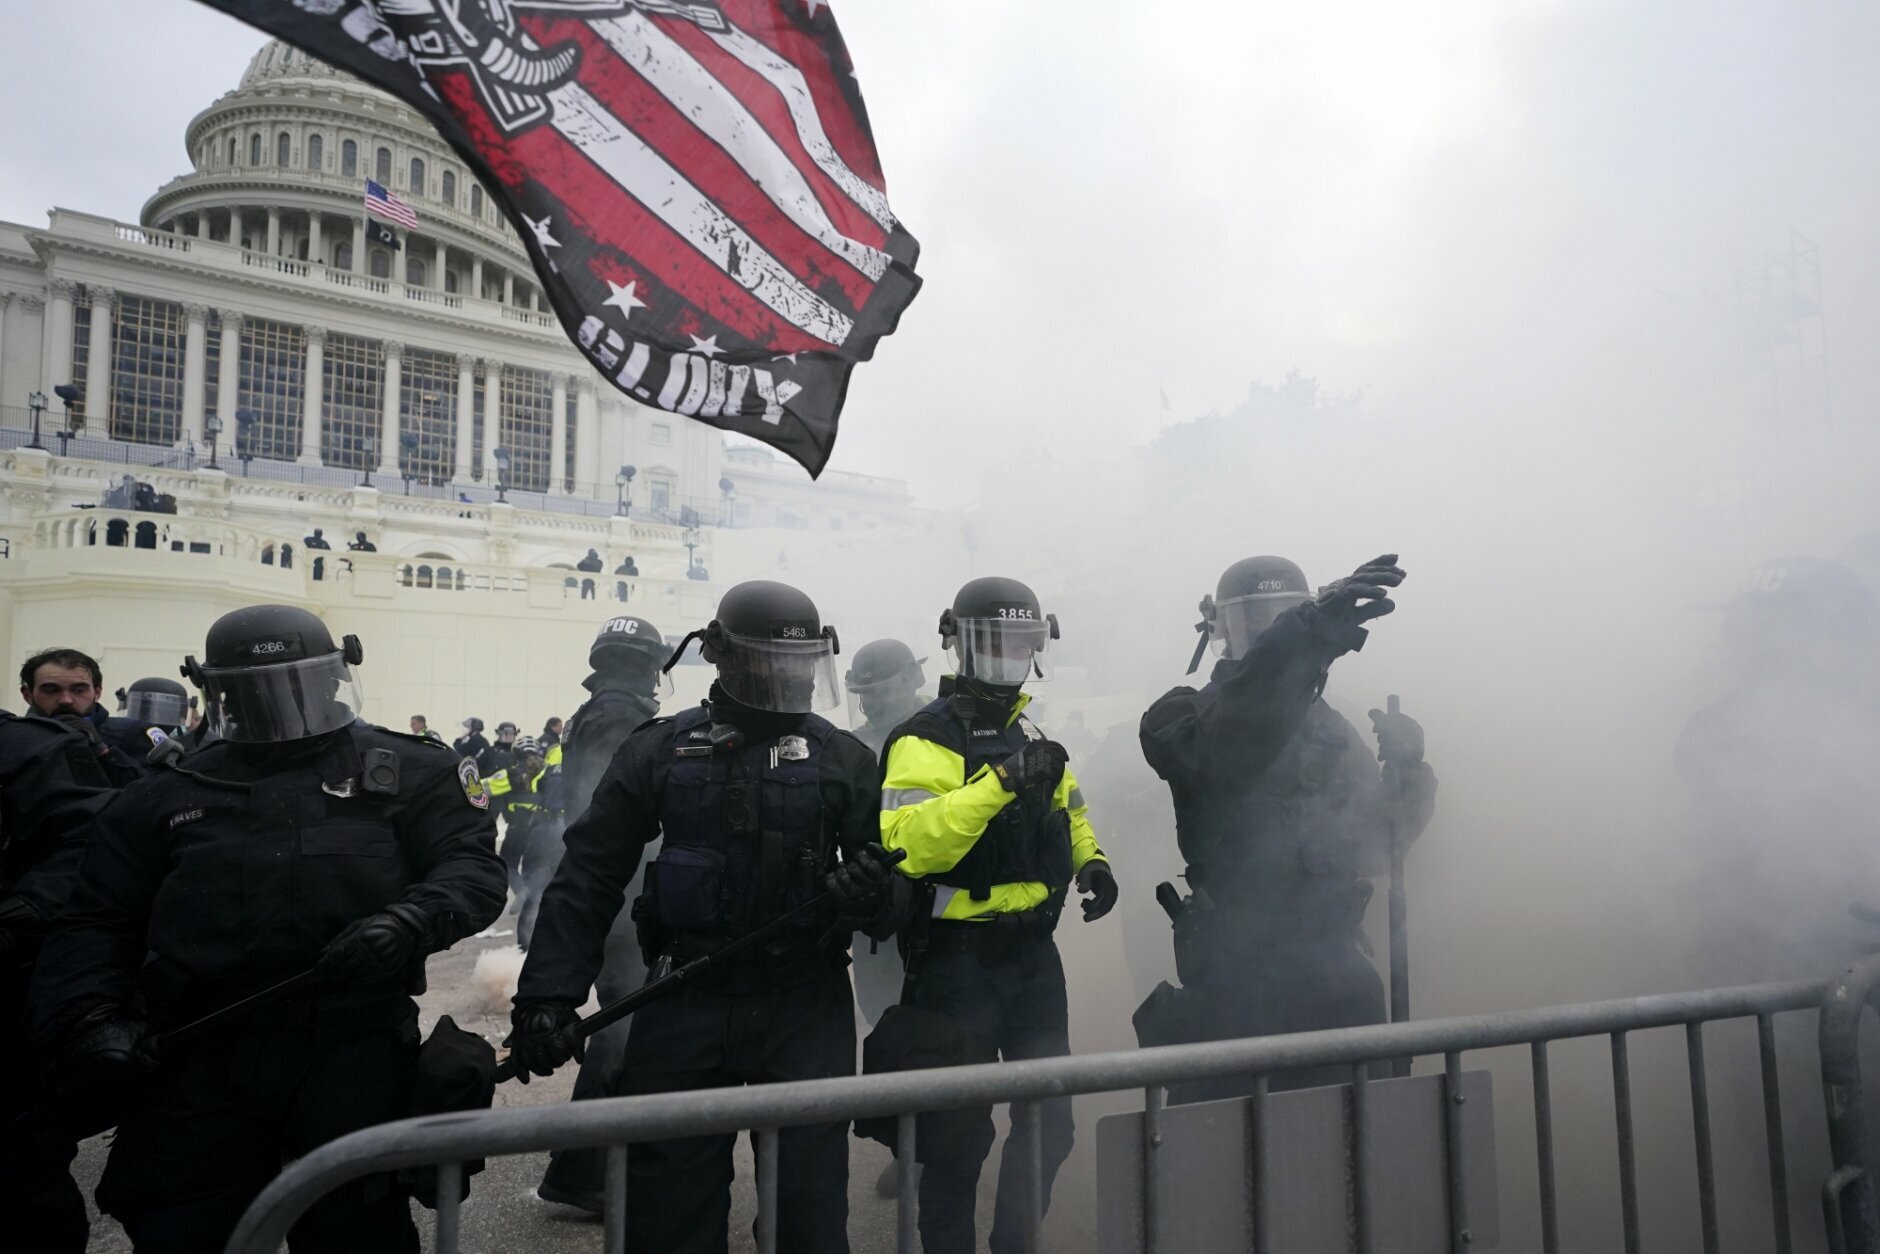 Police hold off Trump supporters who tried to break through a police barrier, Wednesday, Jan. 6, 2021, at the Capitol in Washington. As Congress prepares to affirm President-elect Joe Biden's victory, thousands of people have gathered to show their support for President Donald Trump and his claims of election fraud. (AP Photo/Julio Cortez)